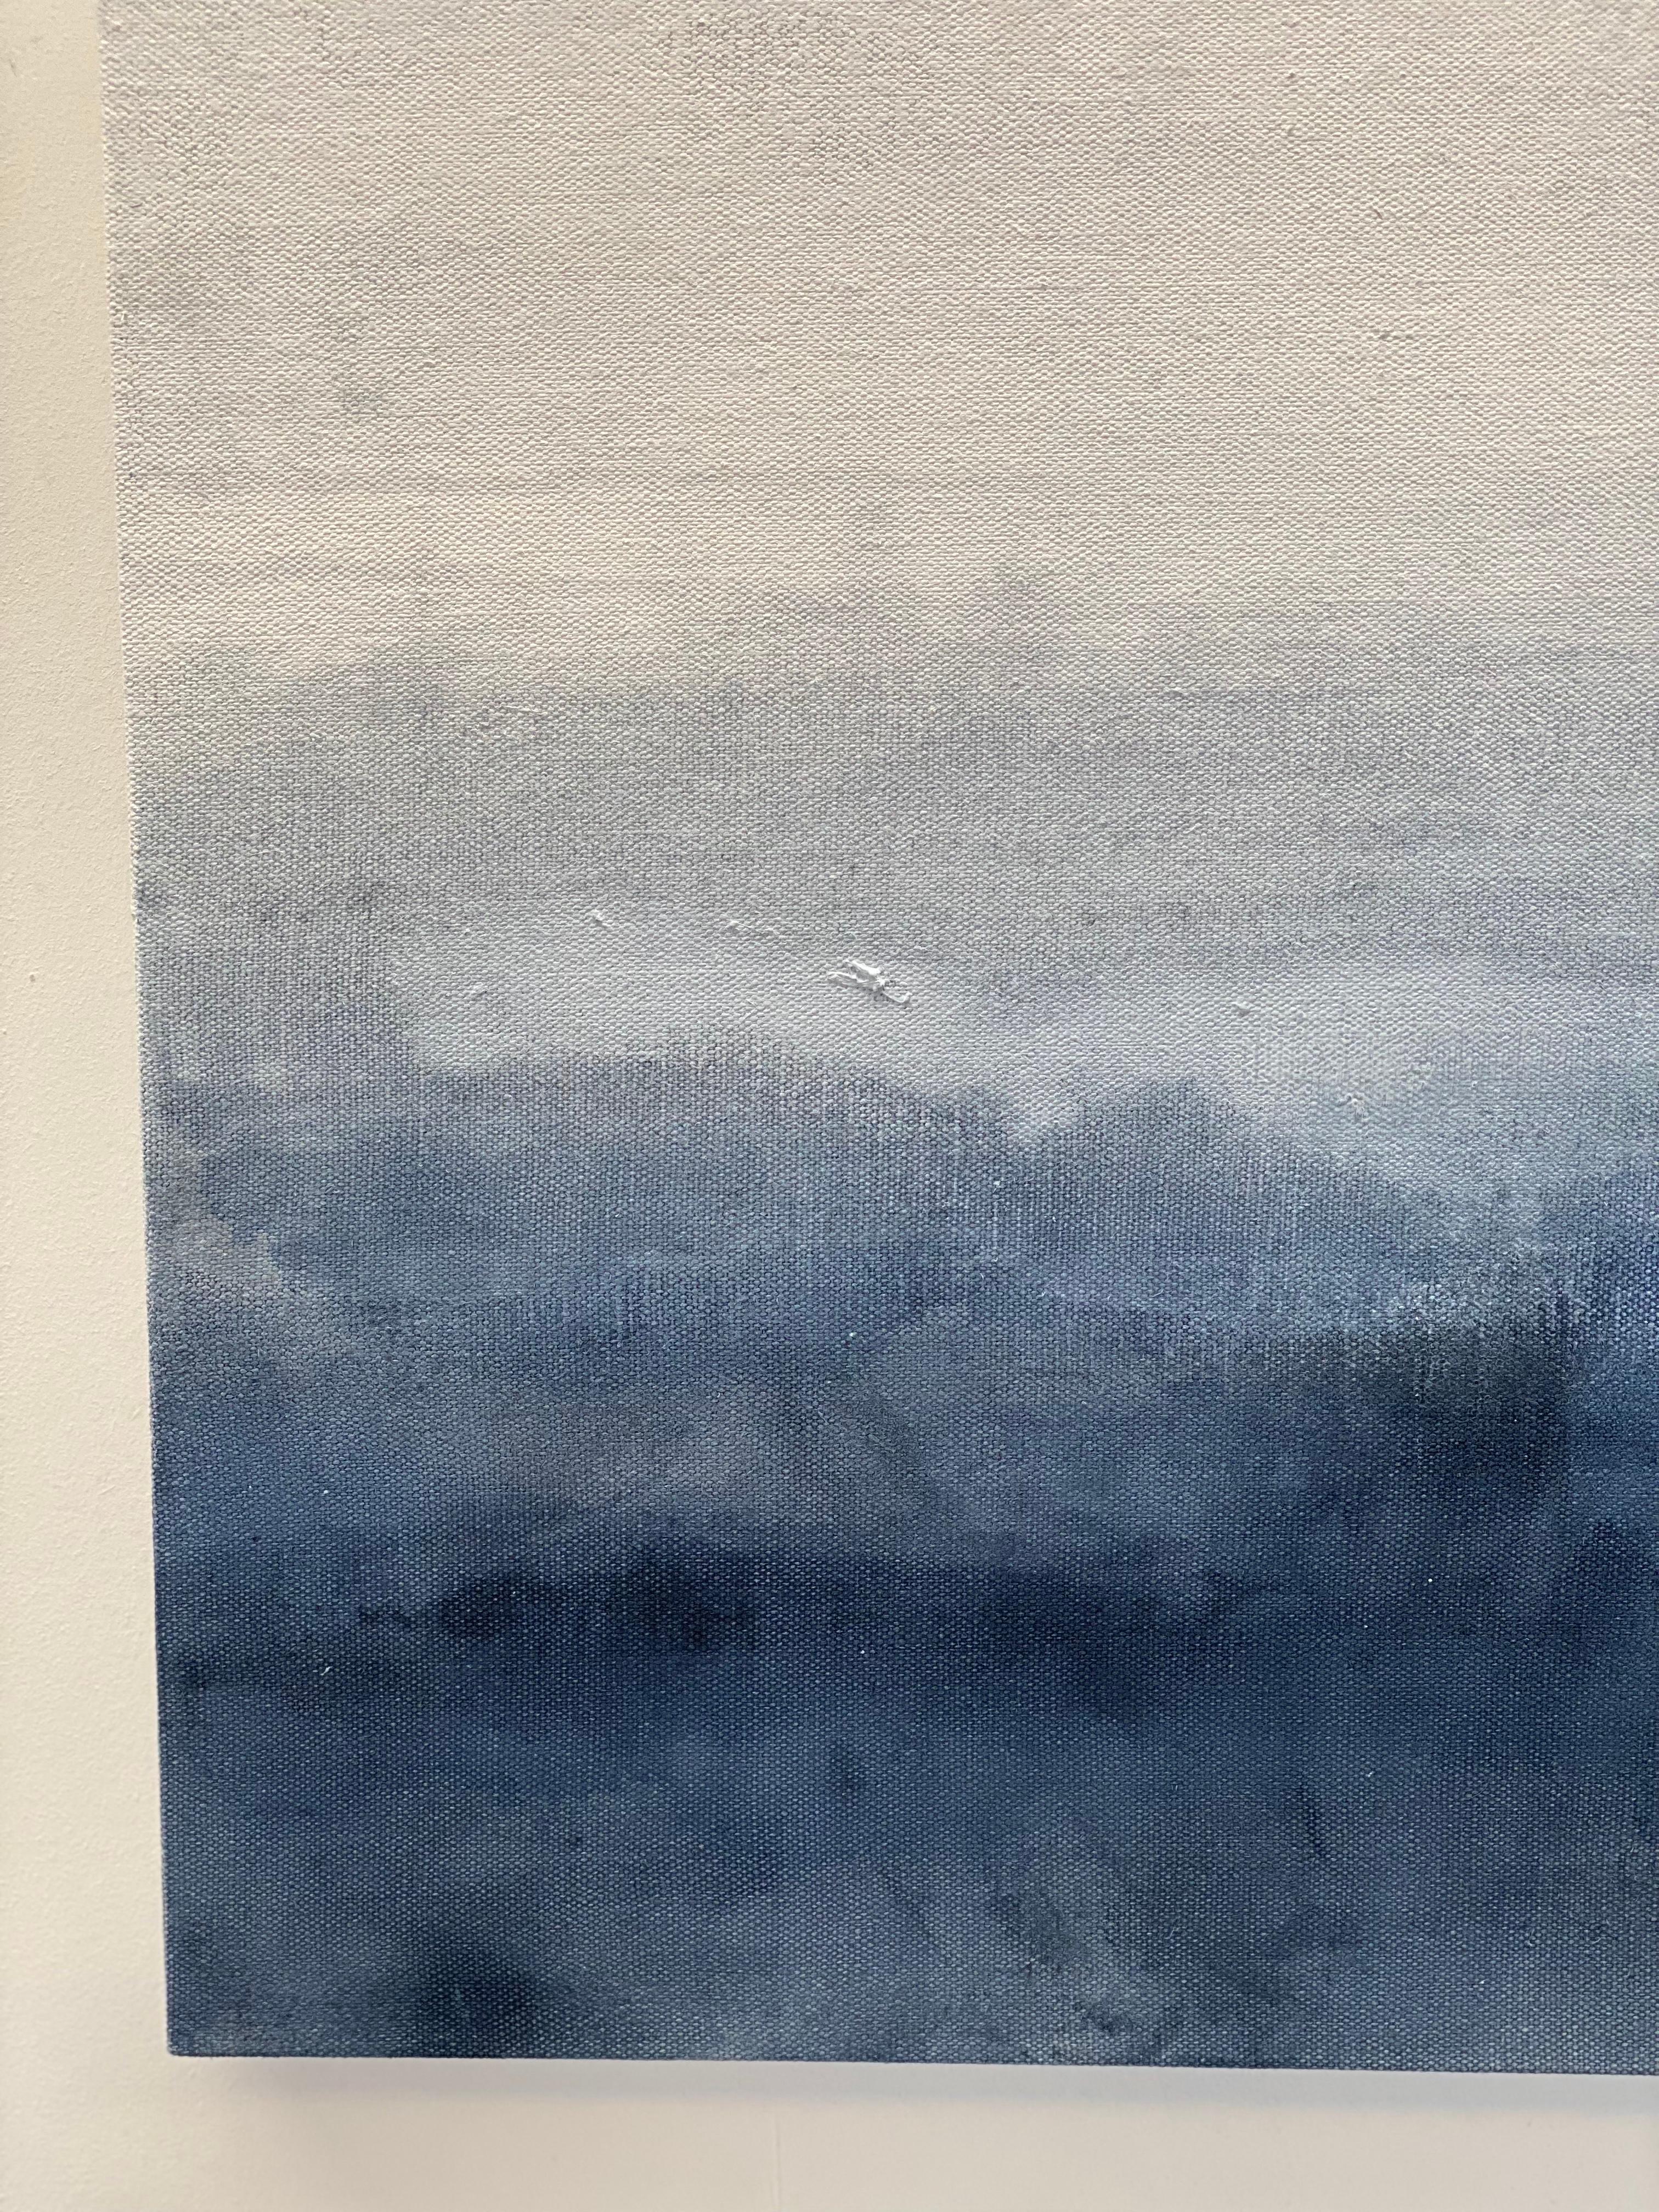 Elegant abstract expressions in soft muted tones of classic blue and white. This series is painted on premium rough linen with built up layers of paint revealing ghostly descriptive details and delicate mark making. Inspired by the vast hazy